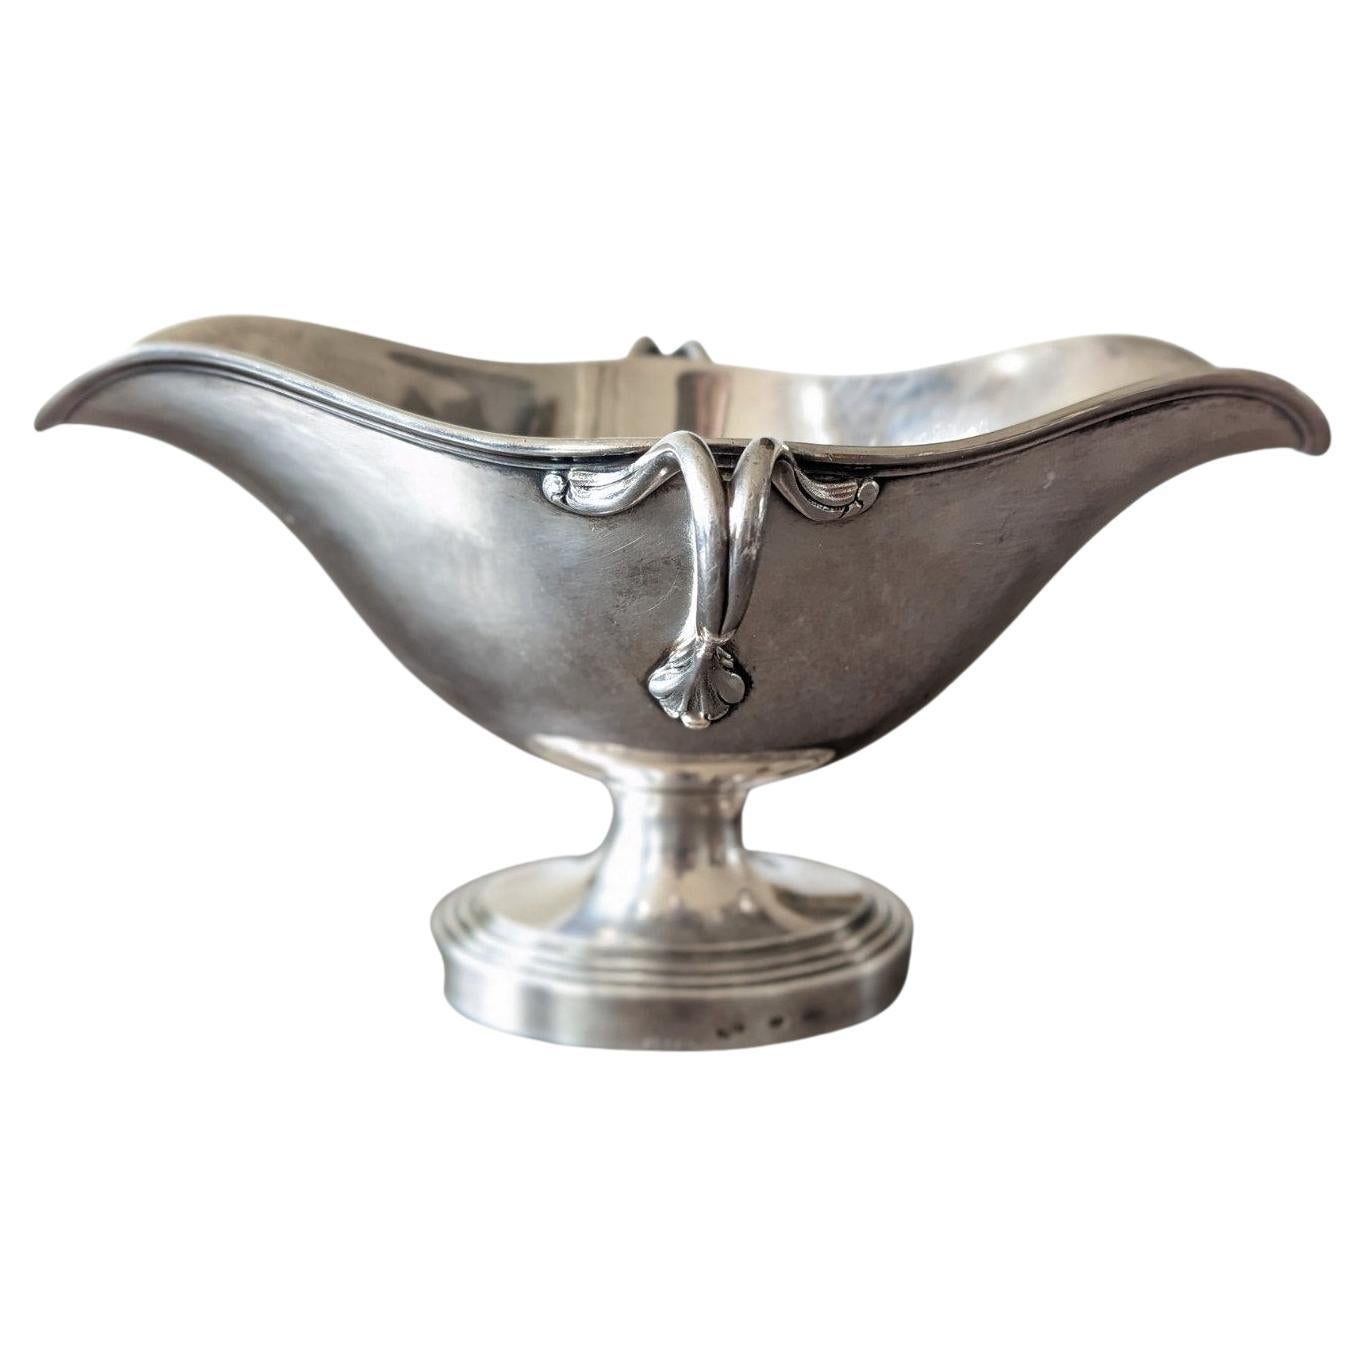 Christofle, Gravy Boat, Silver-Plated For Sale